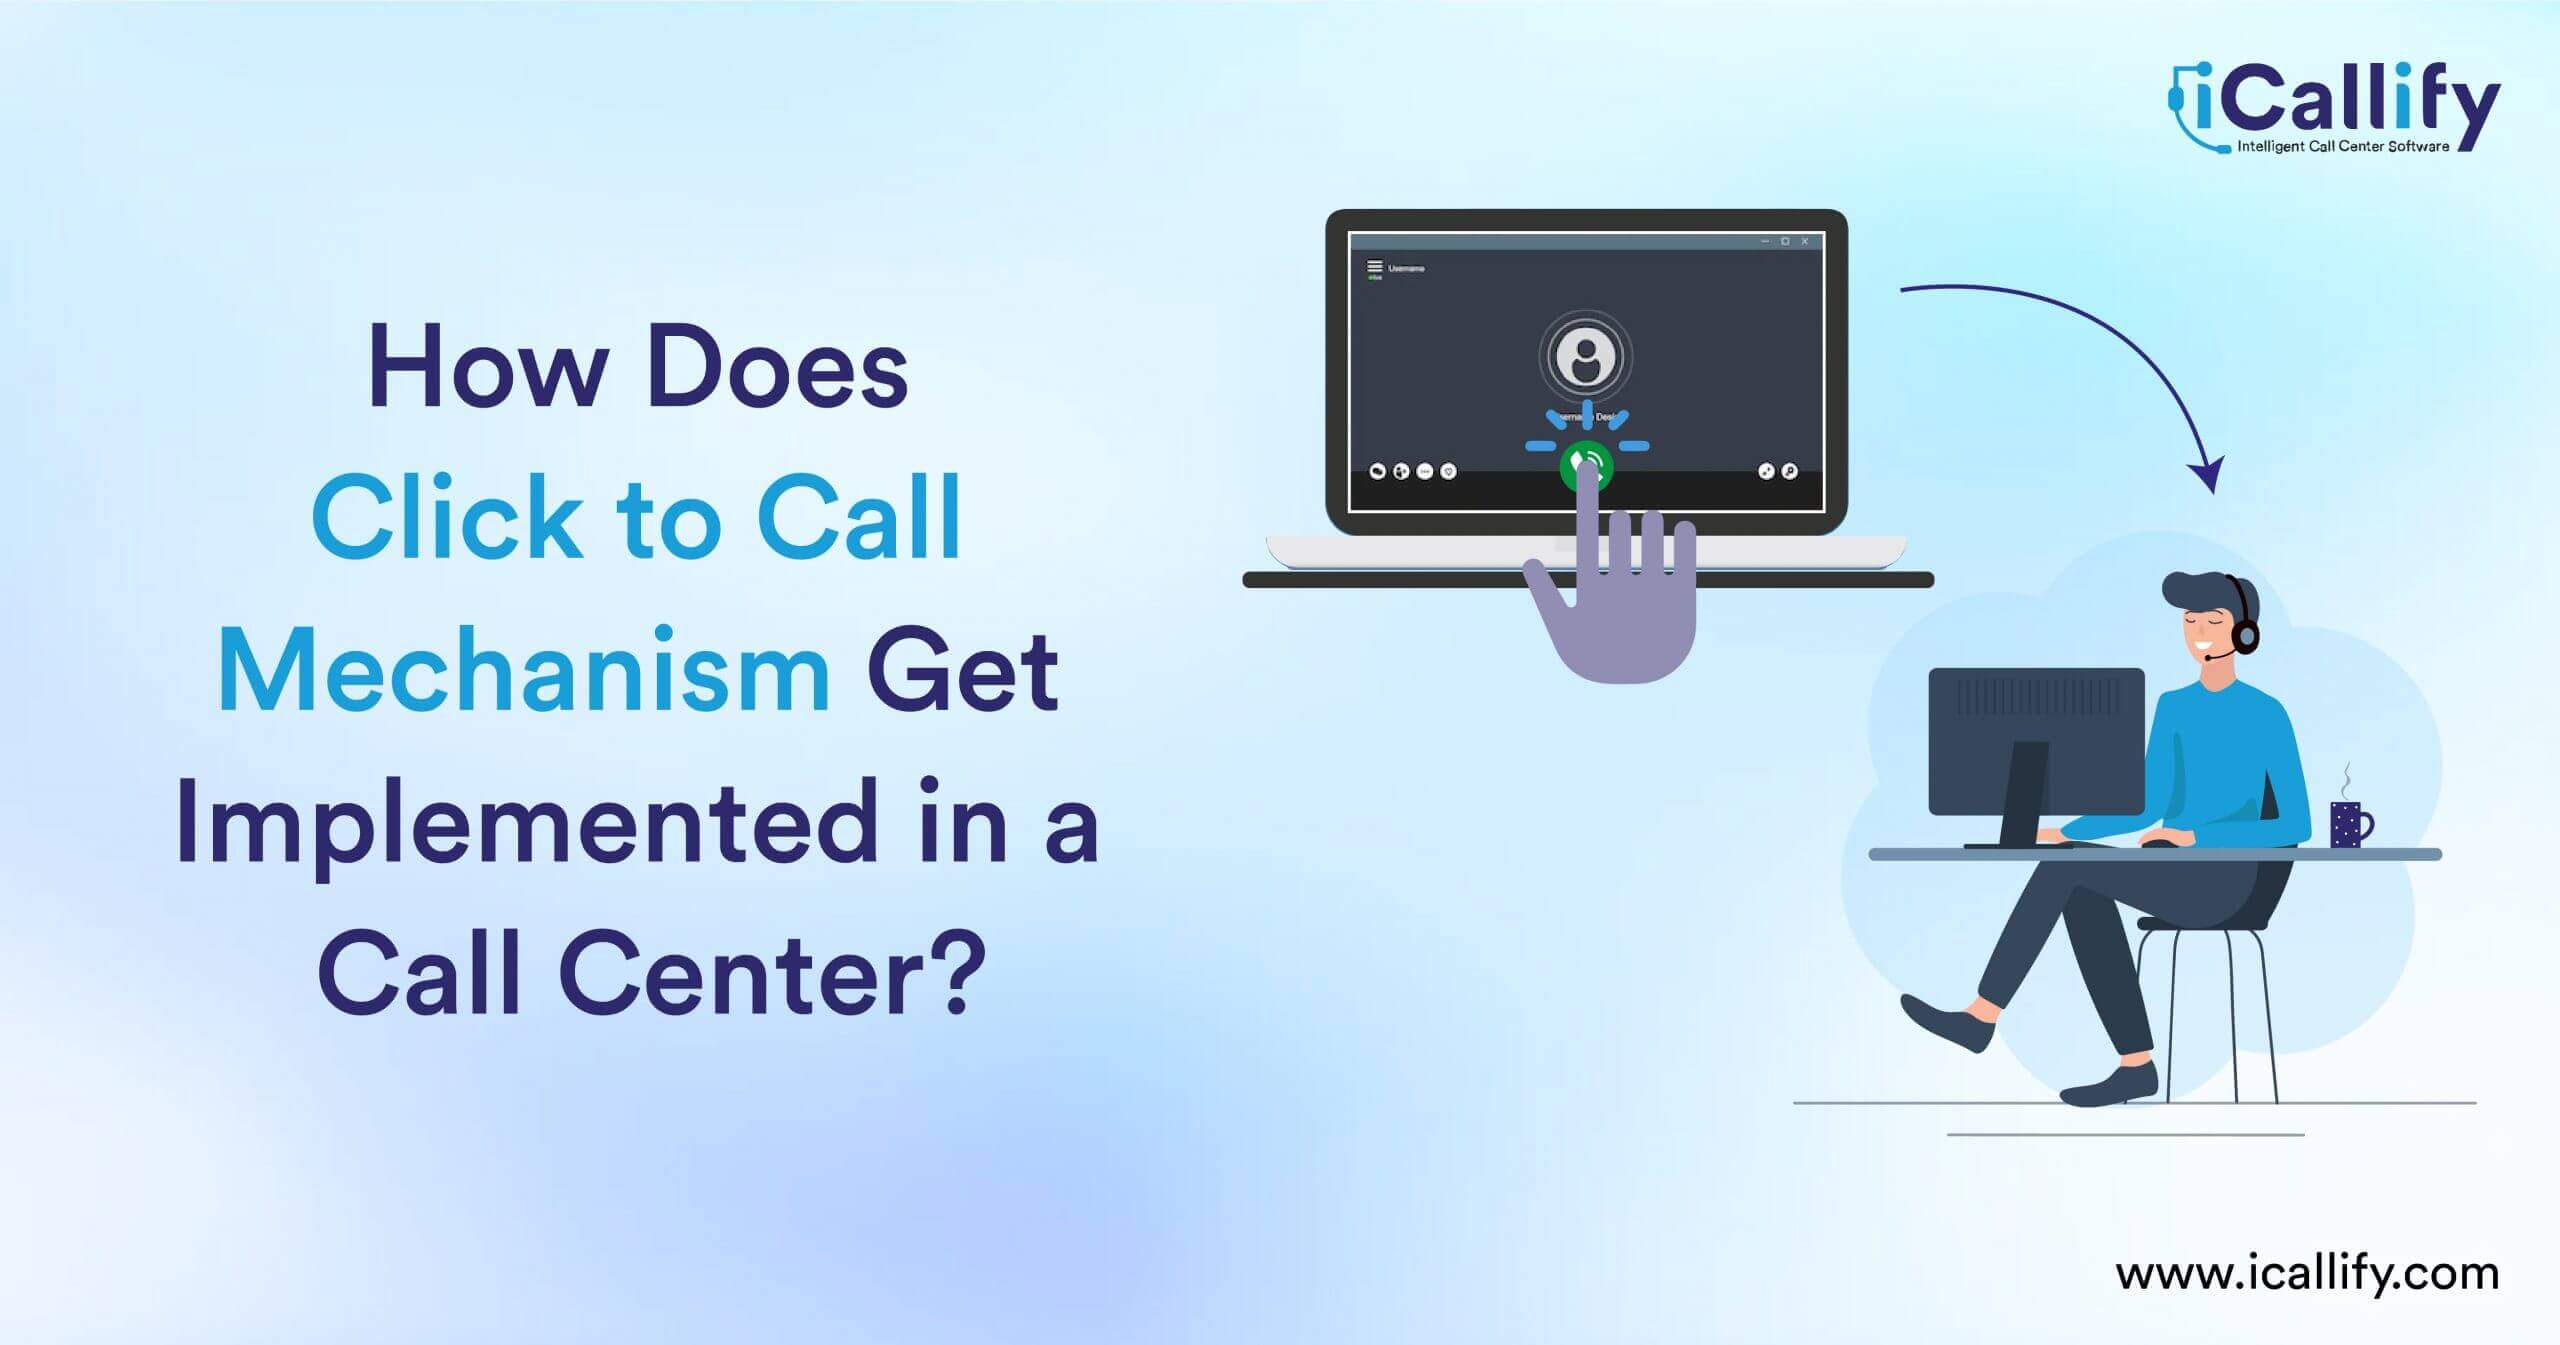 How Does Click to Call Mechanism Get Implemented in a Call Center?